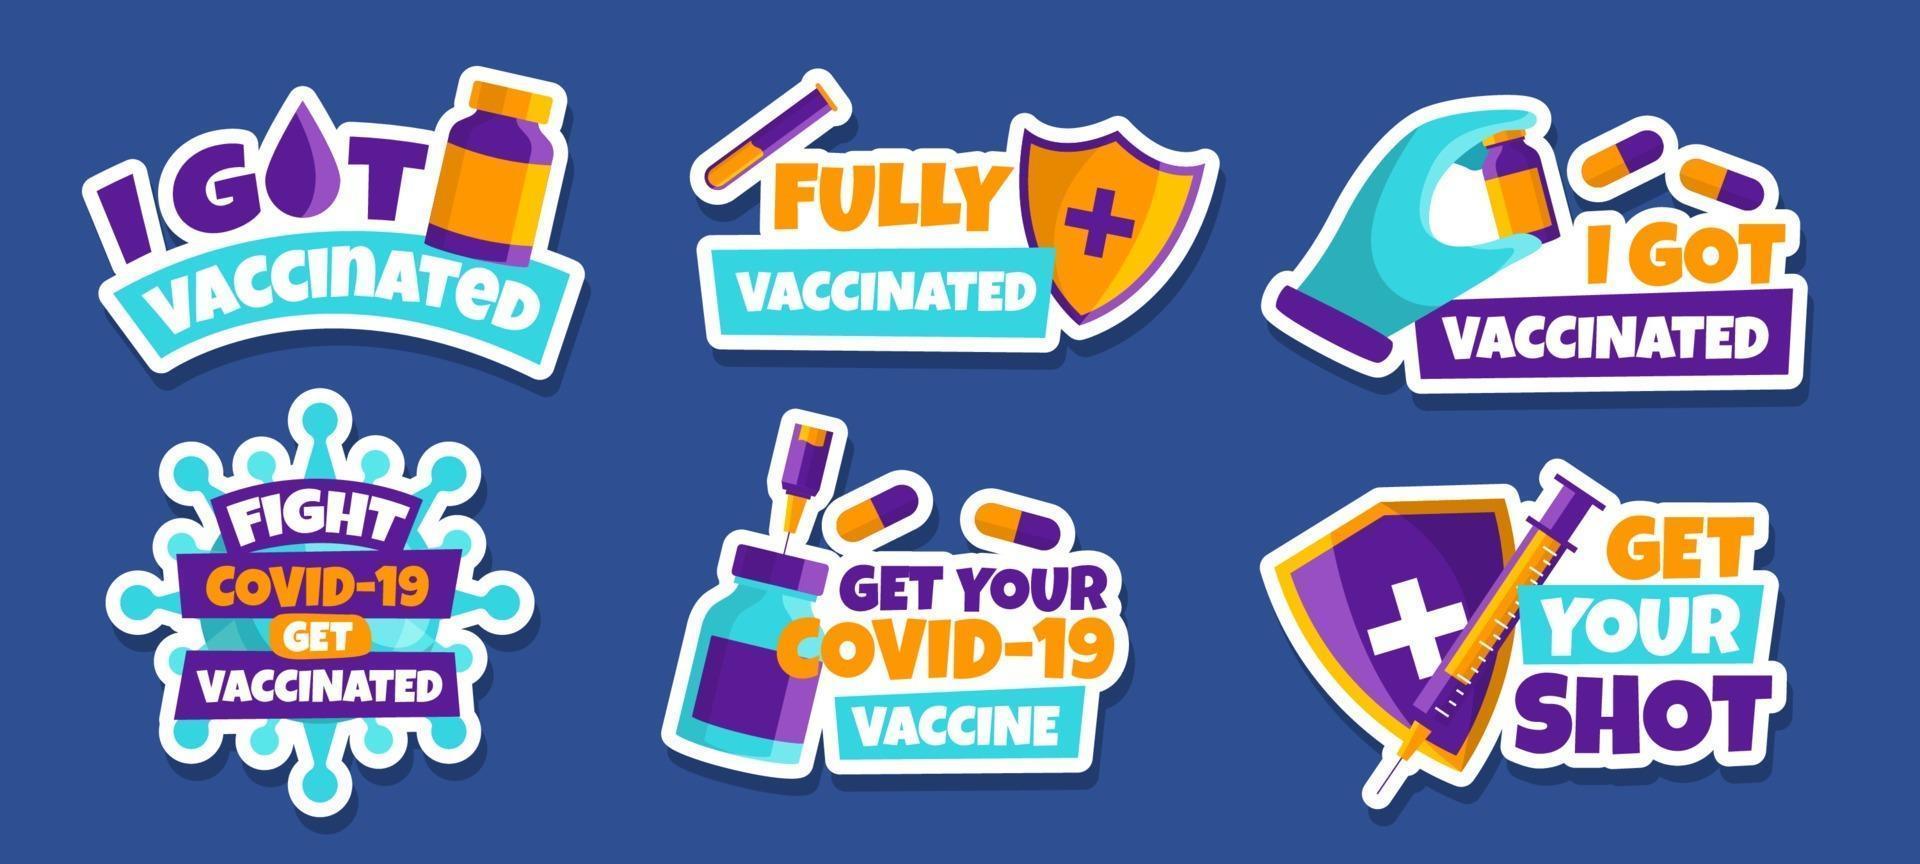 Covid-19 After Vaccine Sticker Set vector